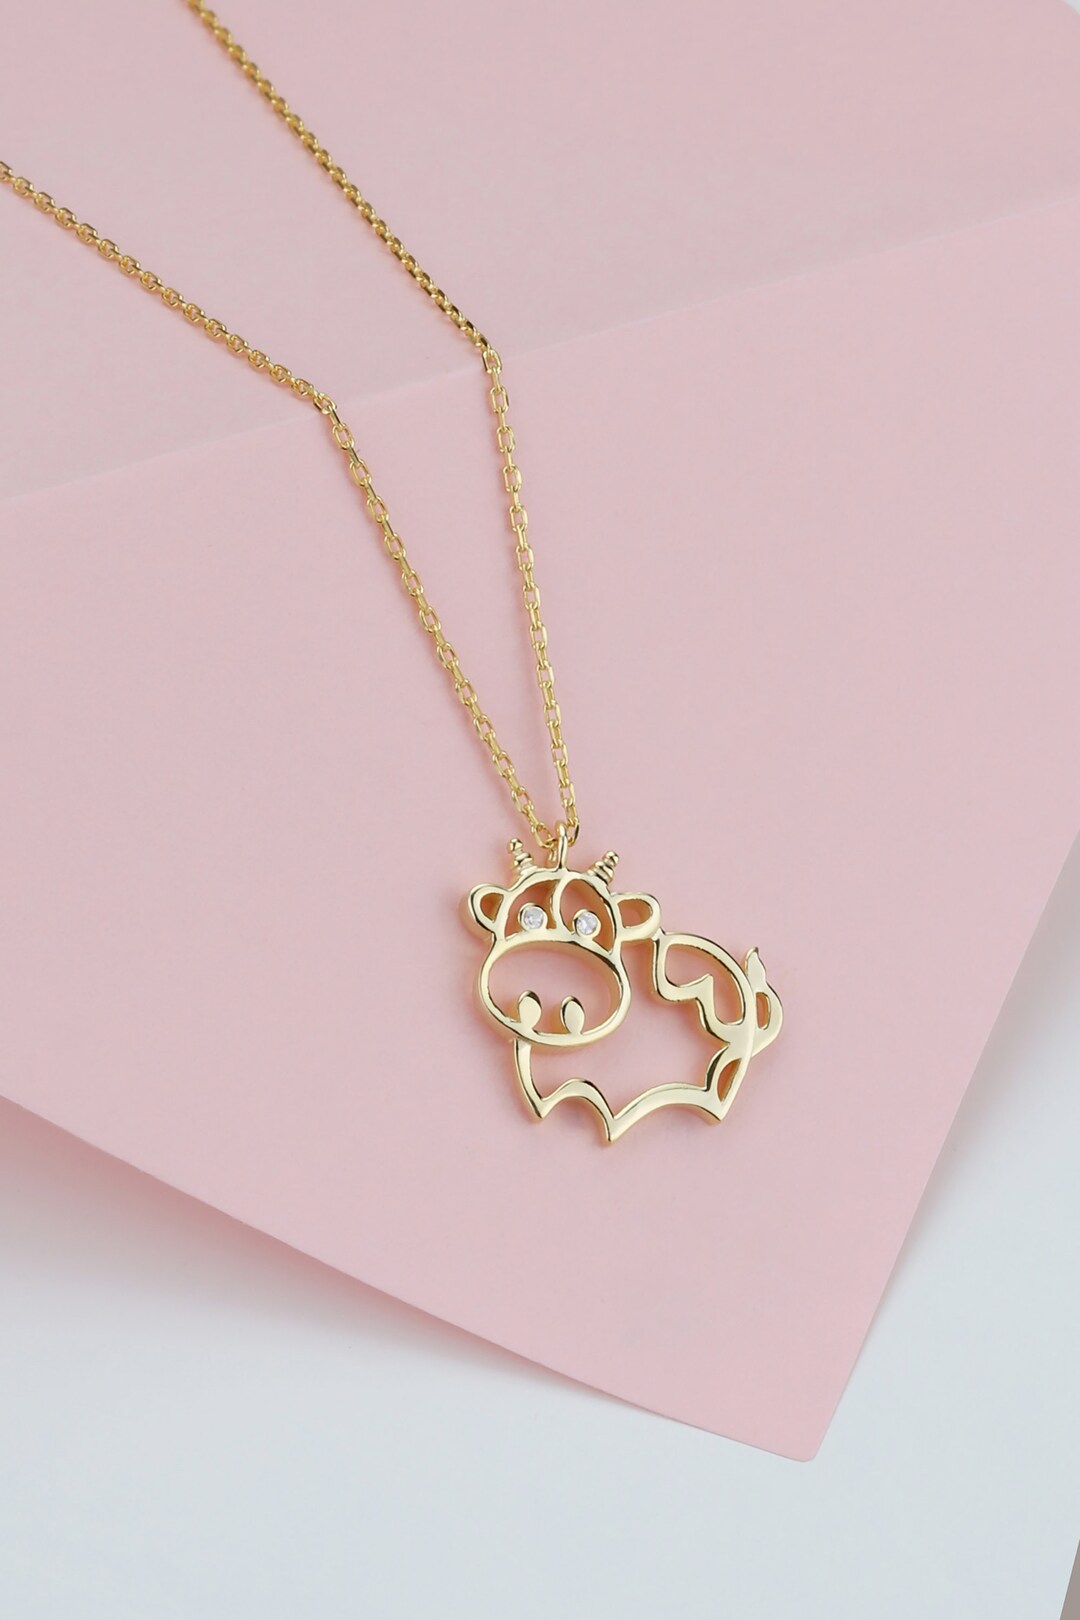 14k 18k Solid Gold Diamond Cow Necklace Pendant, Cattle Cow Jewelry ...